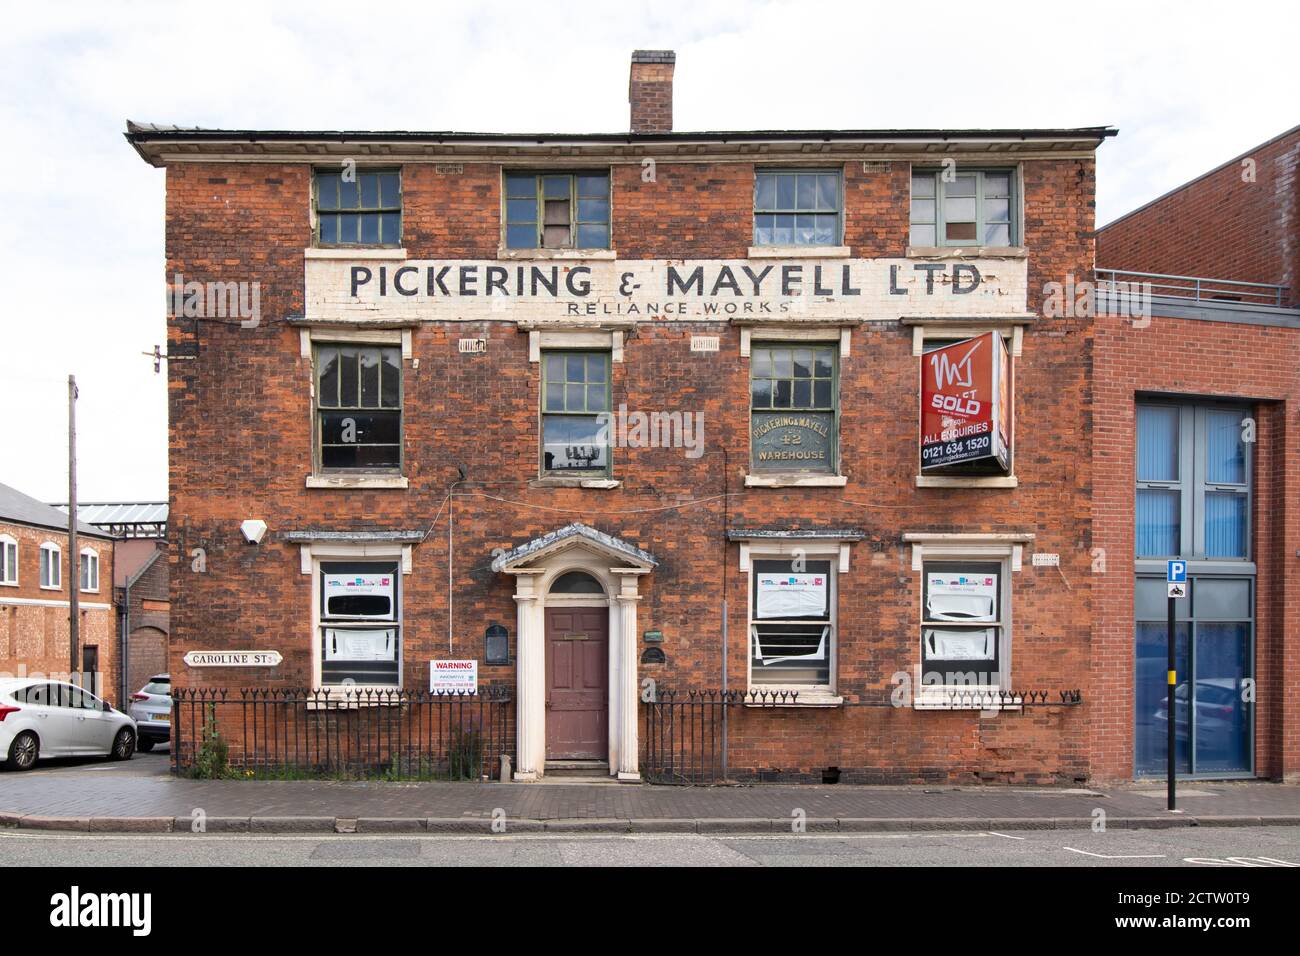 Pickering & Mayell Ltd, situated on the corner of Kenyon Street and Caroline Street in Birmingham Jewellery Quarter. Pickering & Mayell was a jewellery-case-making works specialising in silver. Some of the early occupants were noted silversmiths, George Unite and Nathaniel Mills Stock Photo